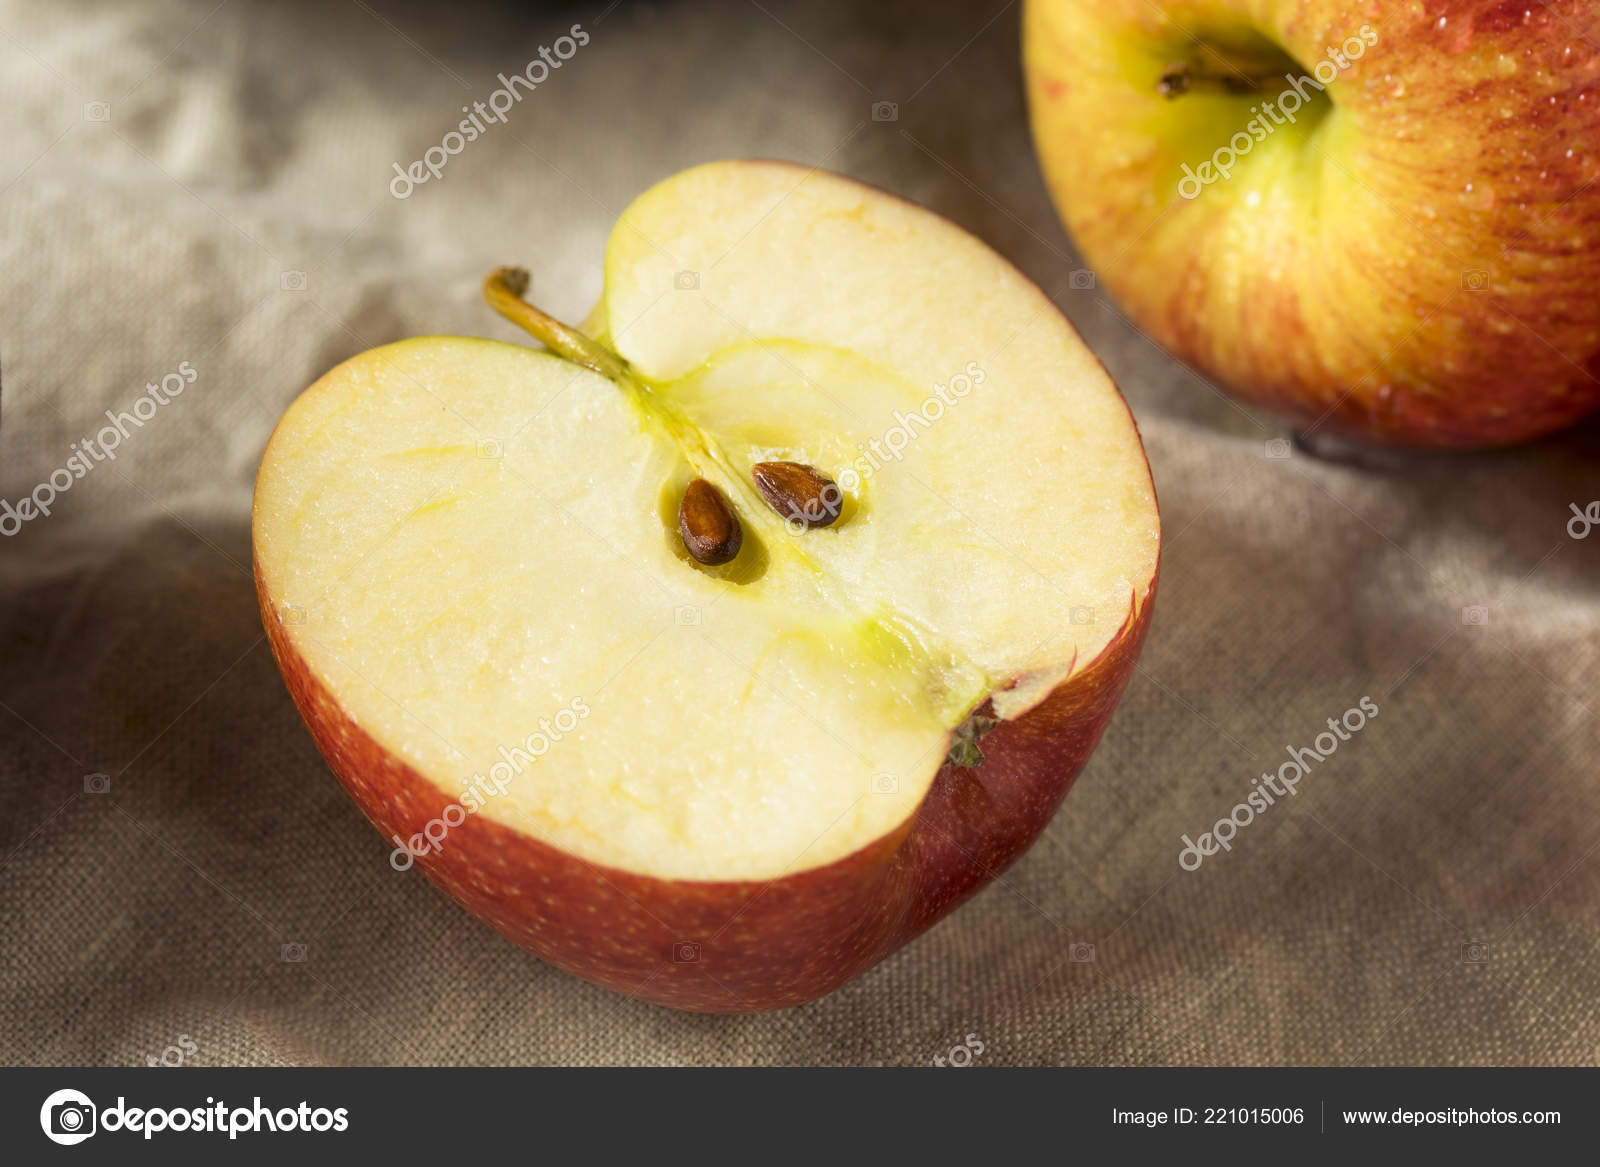 Raw Red Organic Envy Apples Ready Eat Stock Photo by ©bhofack2 221016352